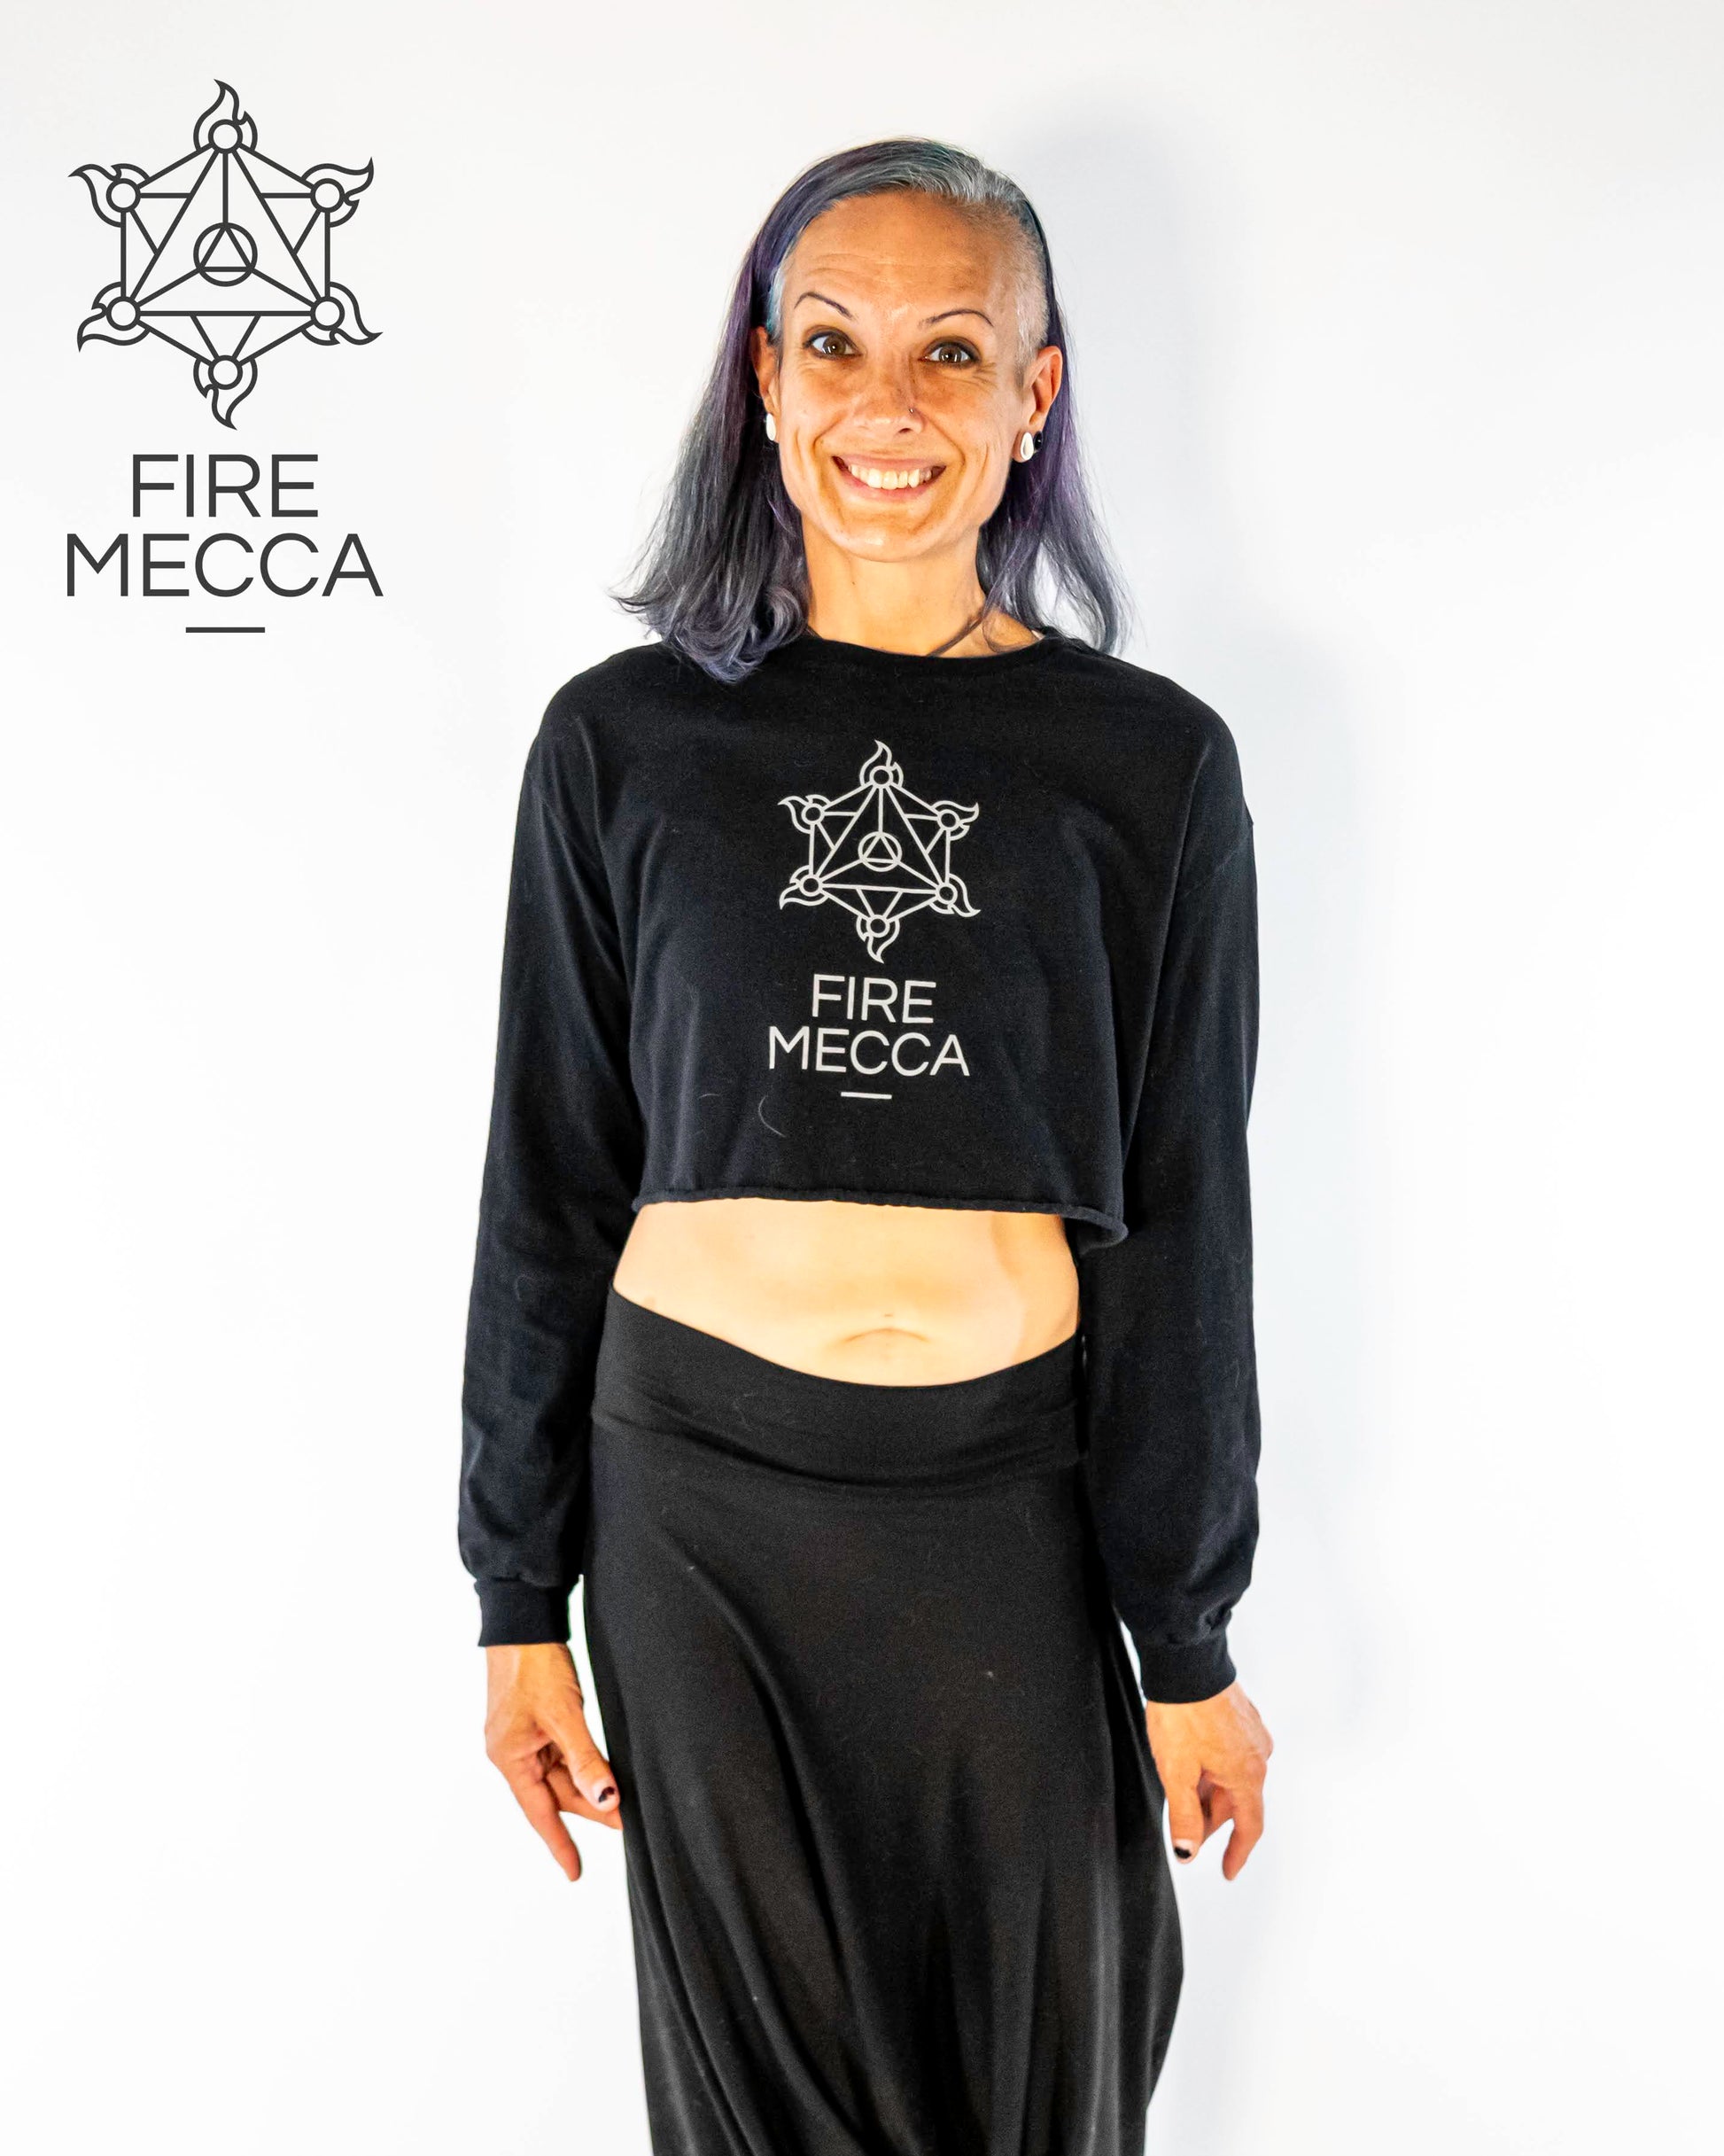 FIRE MECCA Long Sleeve Crop Top – 100% Cotton – Fire Resistant Ink – Performer – Conclave – Flow, Spinning, Circus, Dance –Festivals & Performances - Long Sleeve Crop T-Shirt